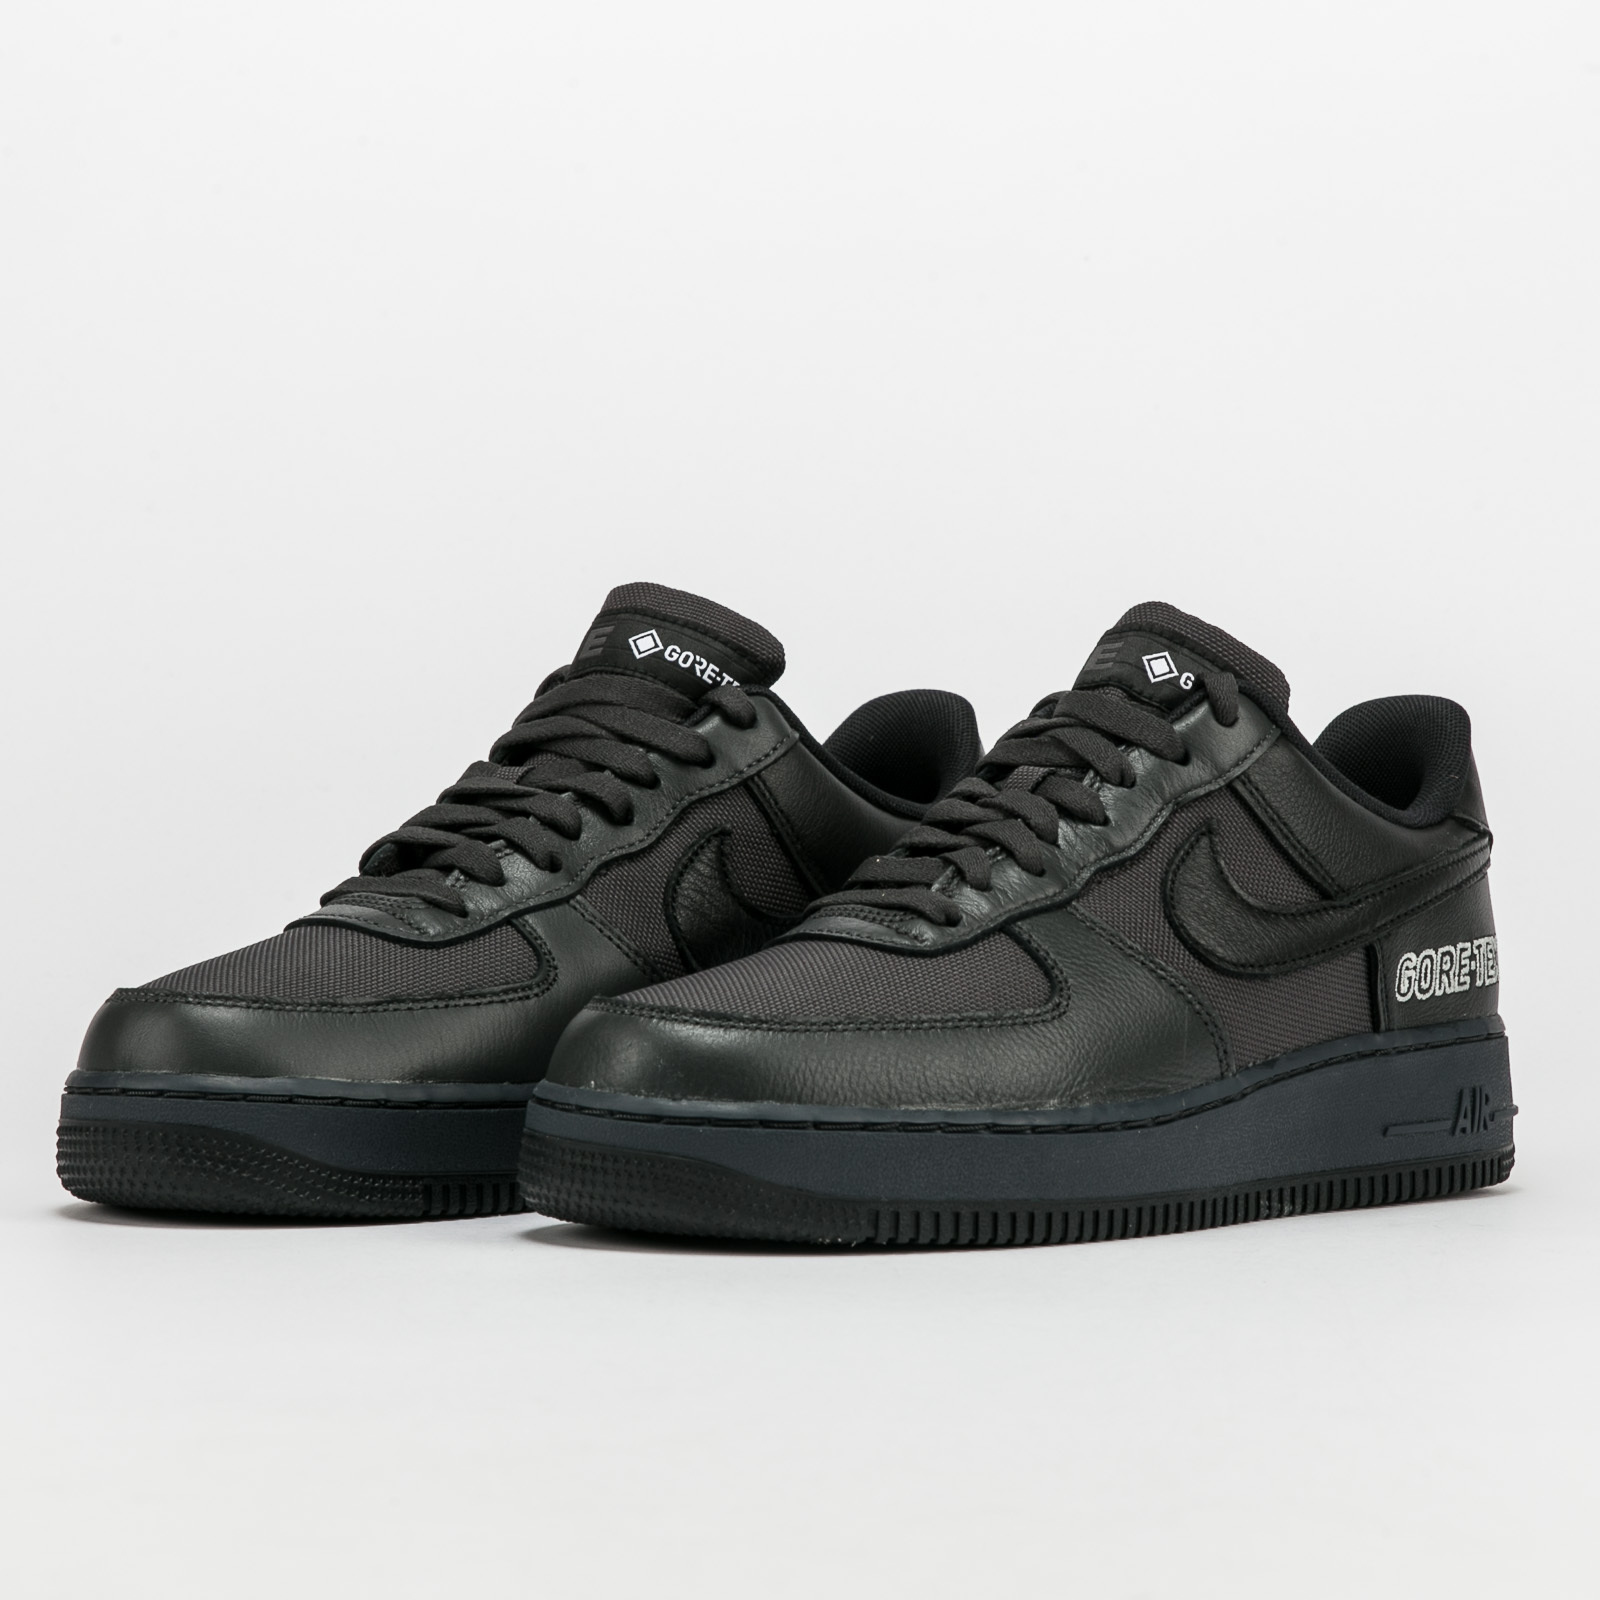 Nike Air Force 1 GTX anthracite / black - barely grey Nike